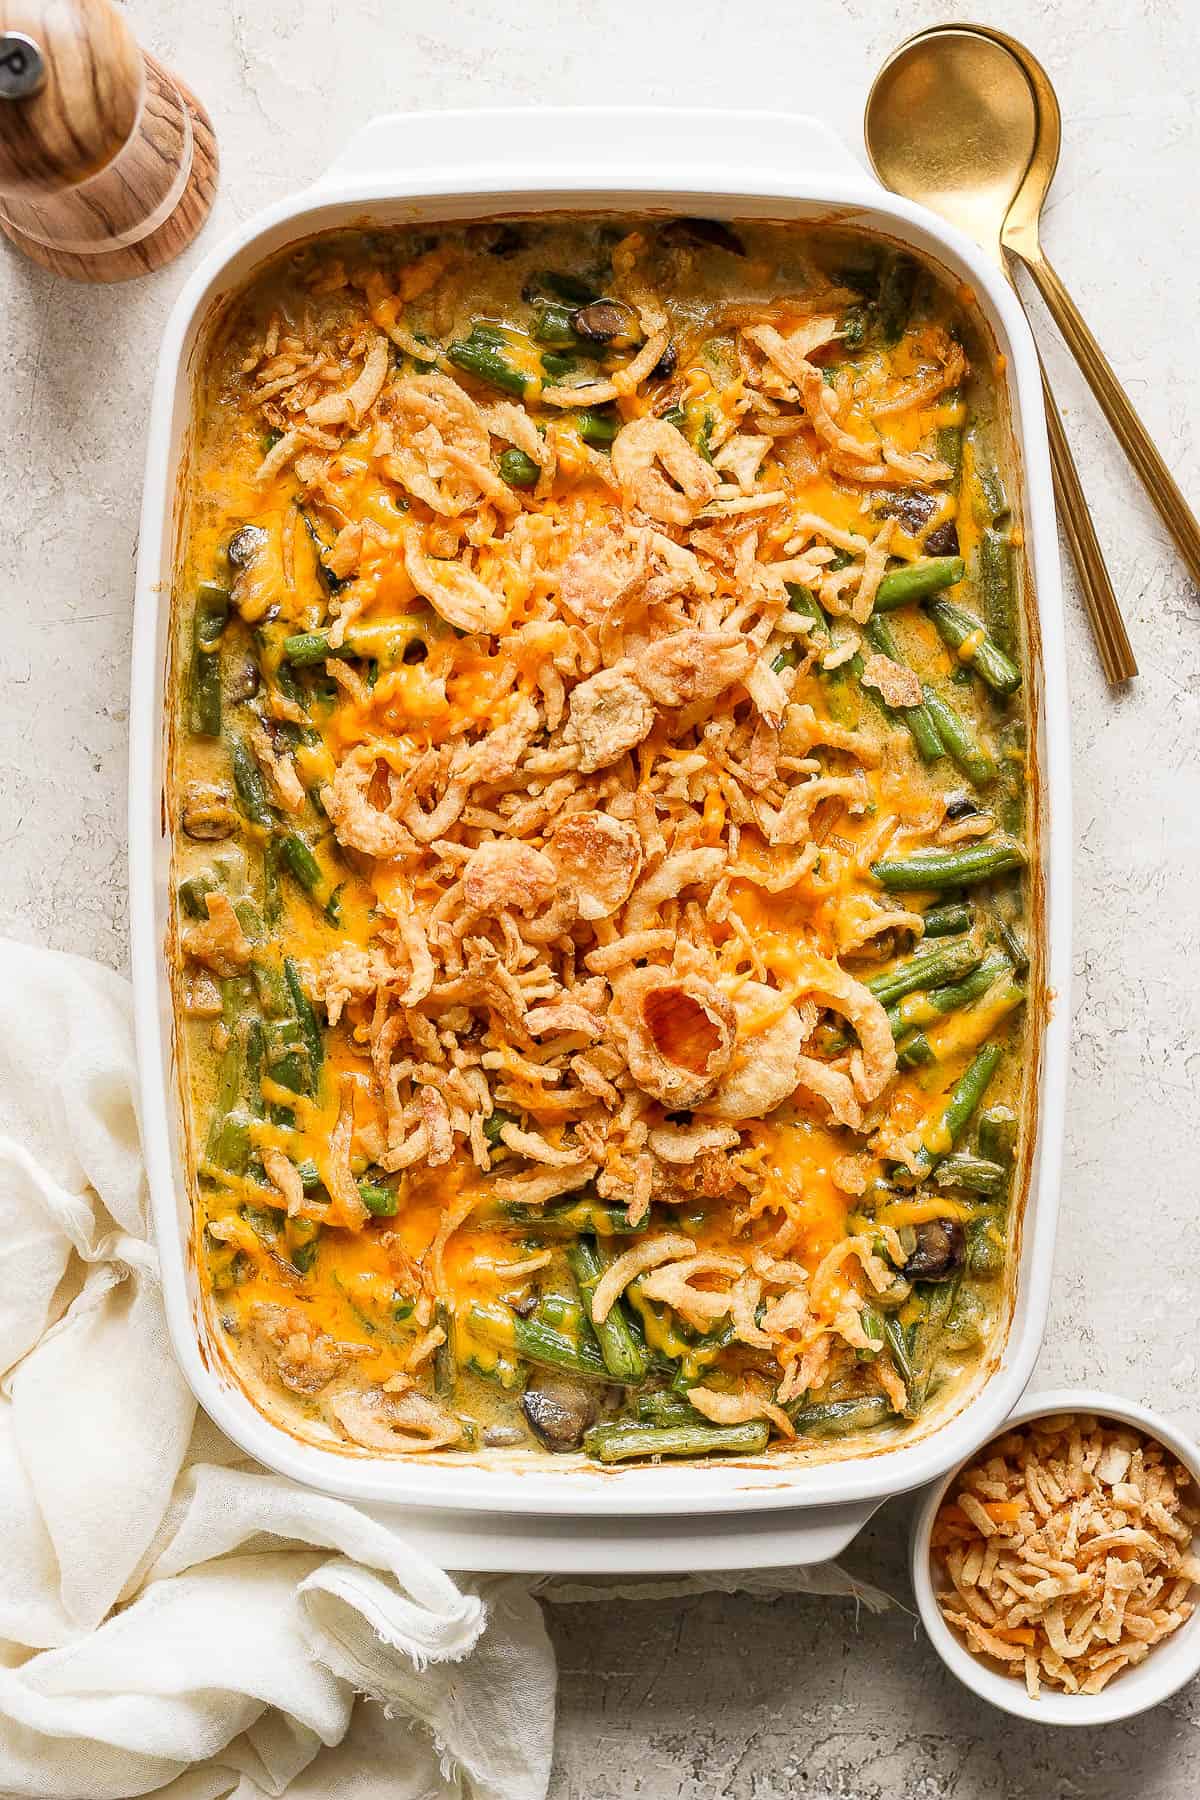 A fully baked cheesy green bean casserole with french fried onions on top.